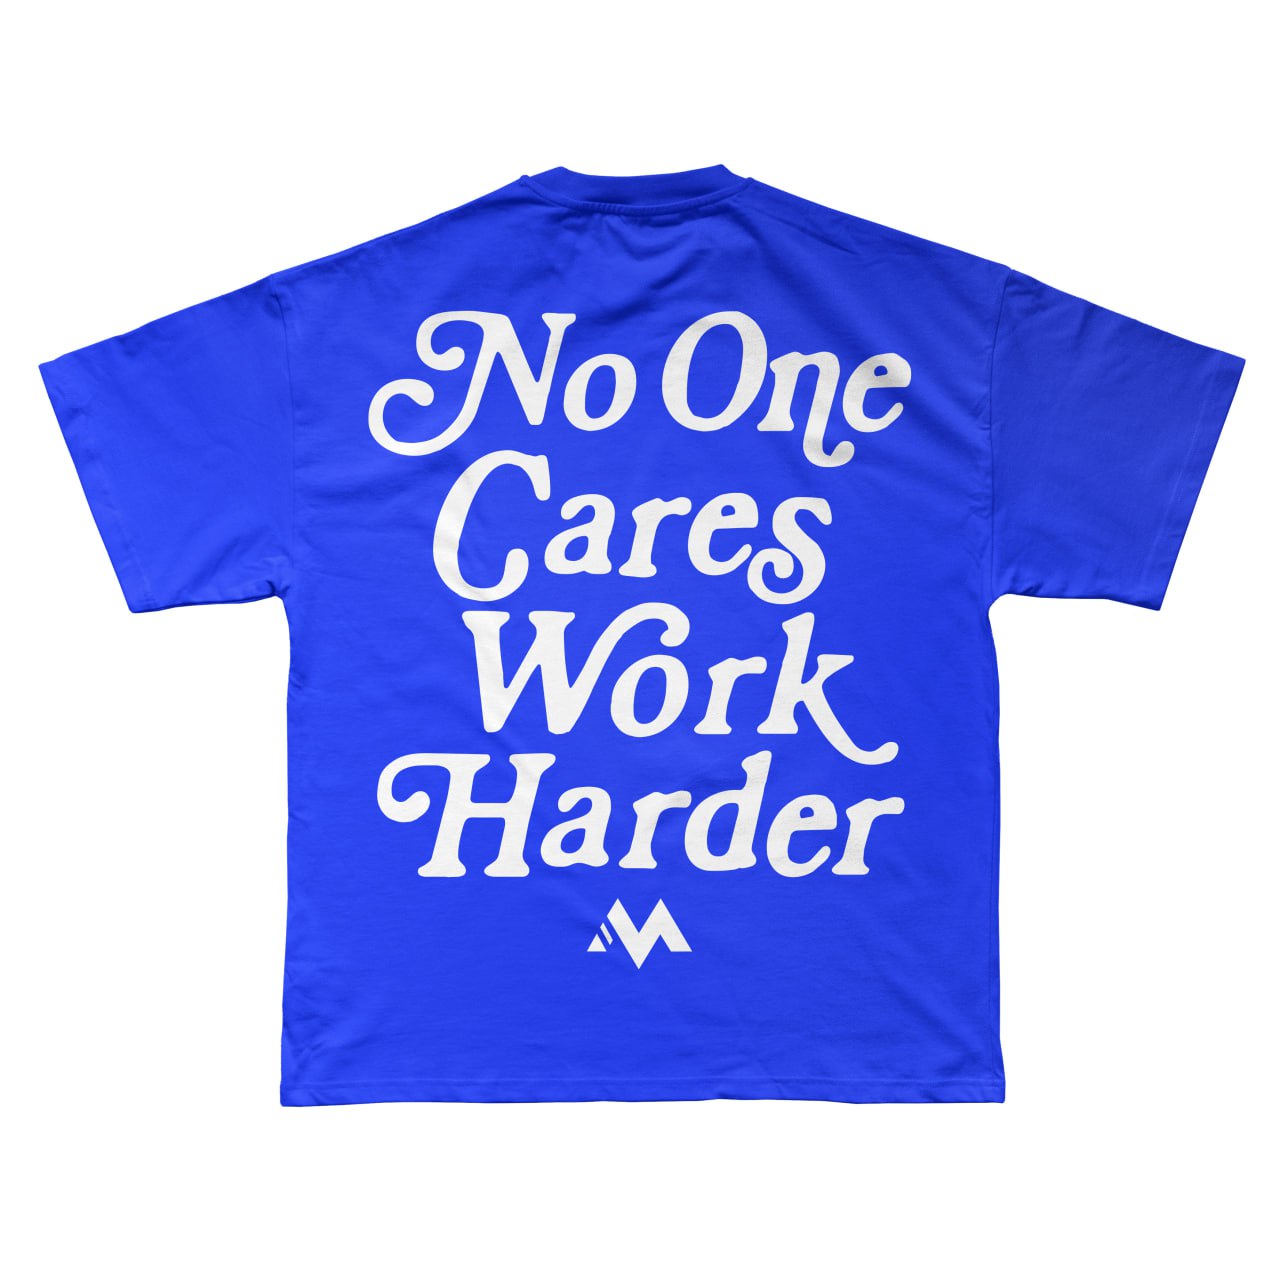 'NO ONE CARES WORK HARDER' TEE - COLBAT BLUE